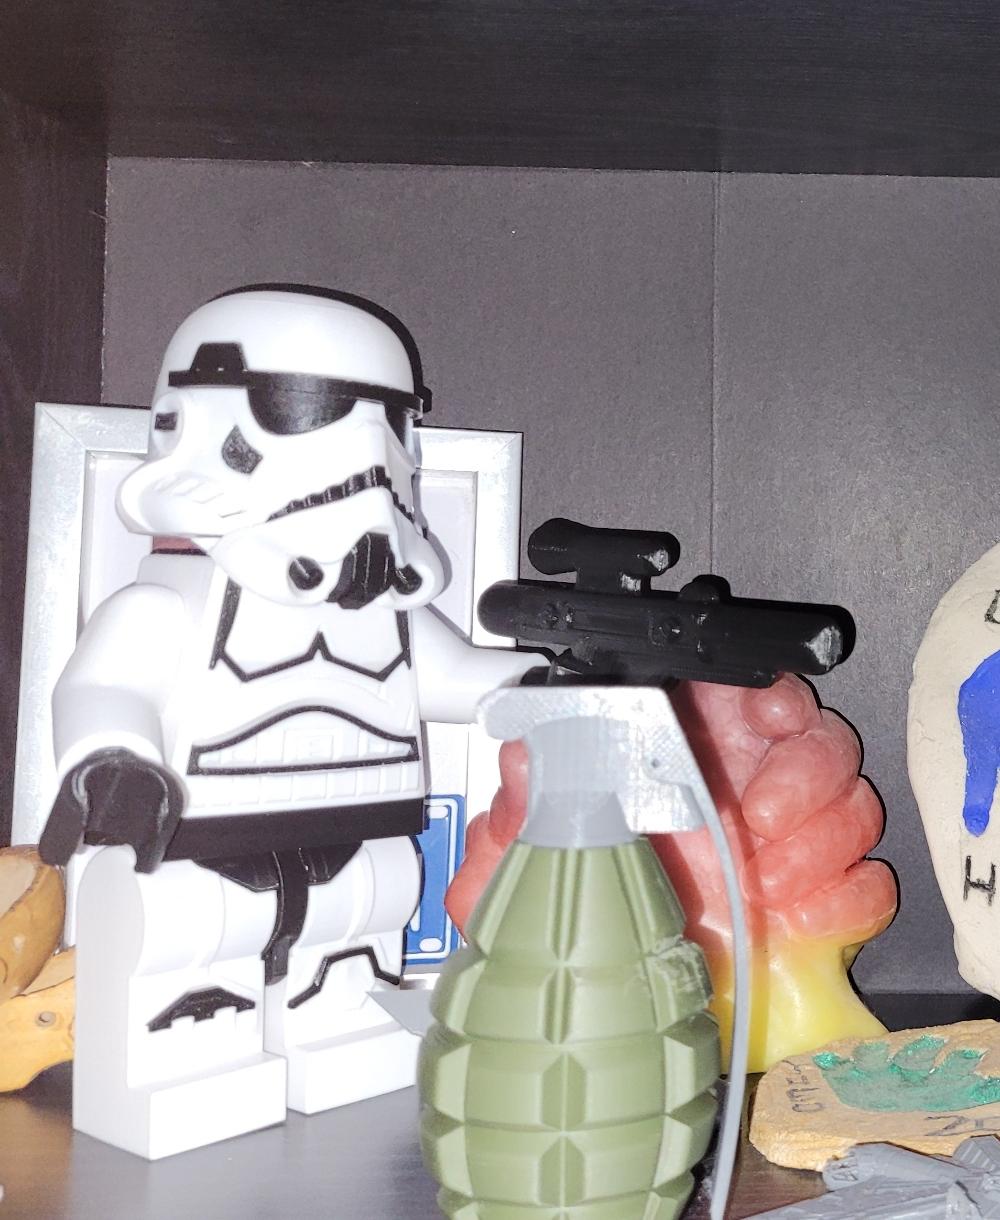 Stormtrooper (6:1 LEGO-inspired brick figure, NO MMU/AMS, NO supports, NO glue) - Found his home! - 3d model